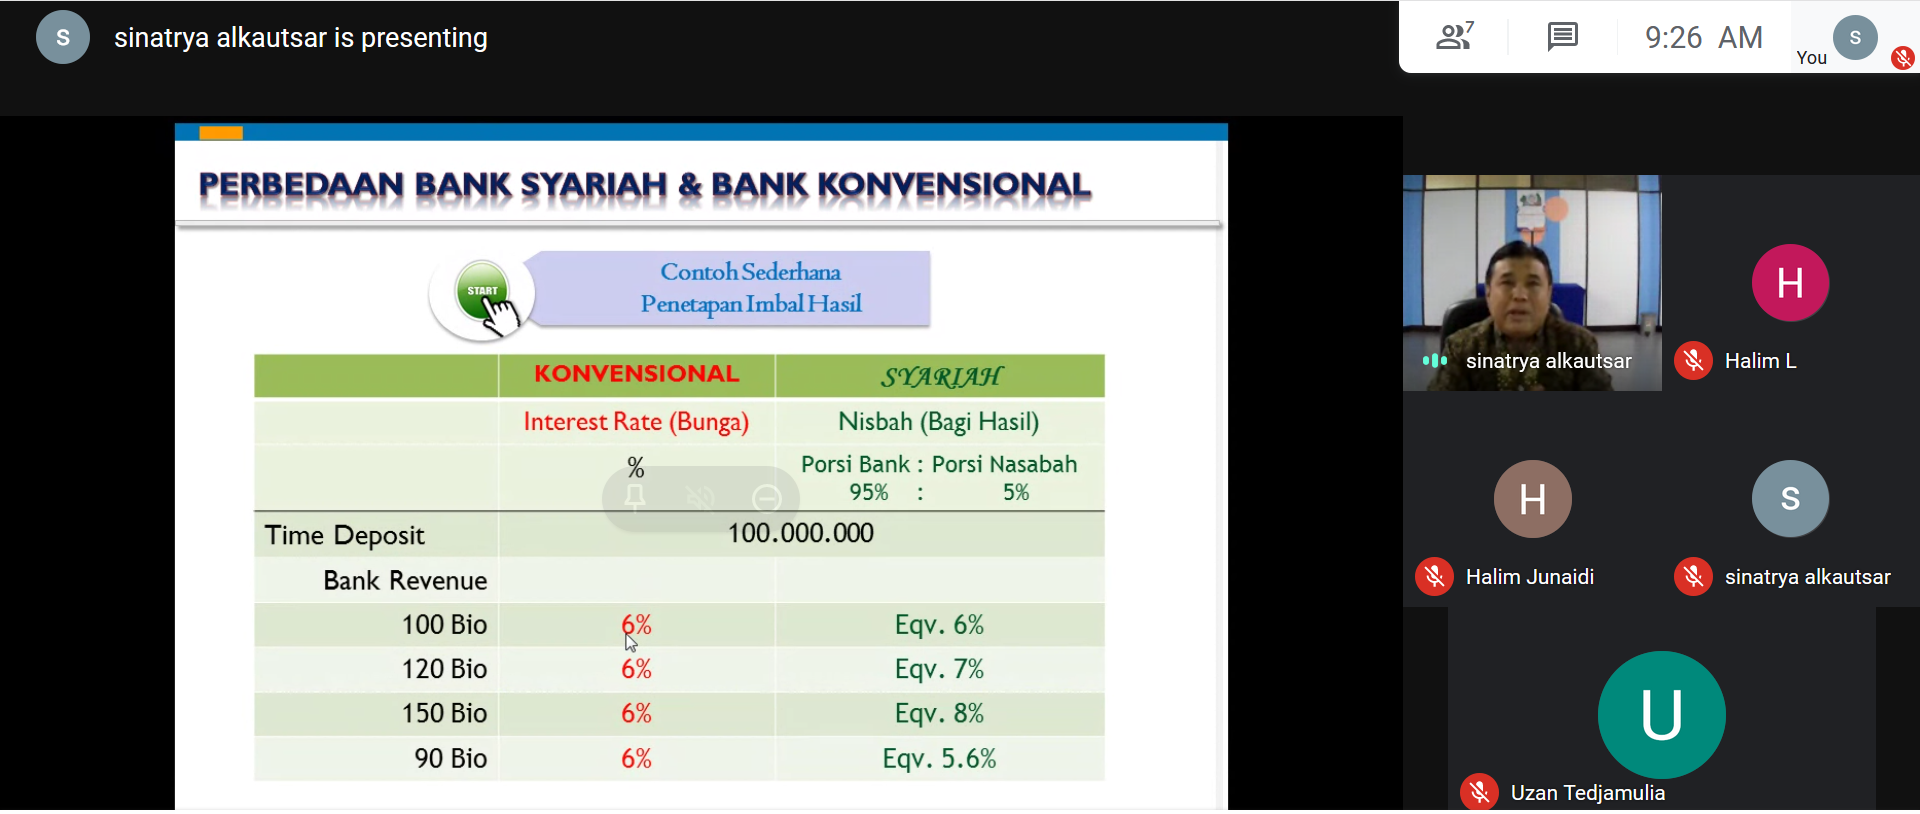 Online Learning Services  - Executive Overview of Islamic Bank PT. Bank Sinarmas